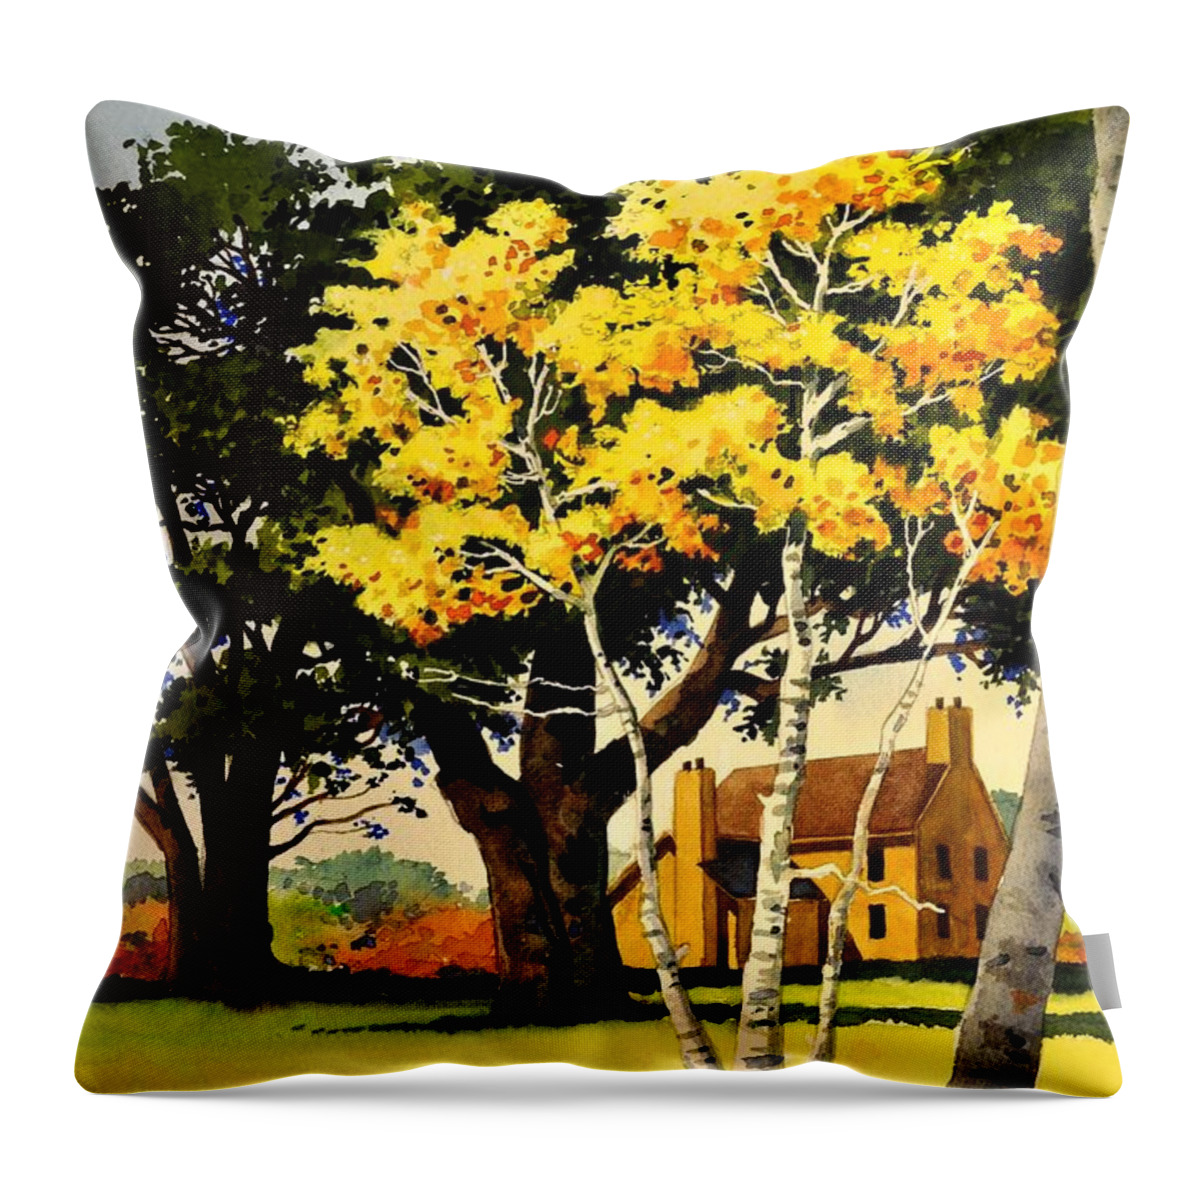 Watercolor Techniques Throw Pillow featuring the painting Yellow Birches by Robert W Cook 